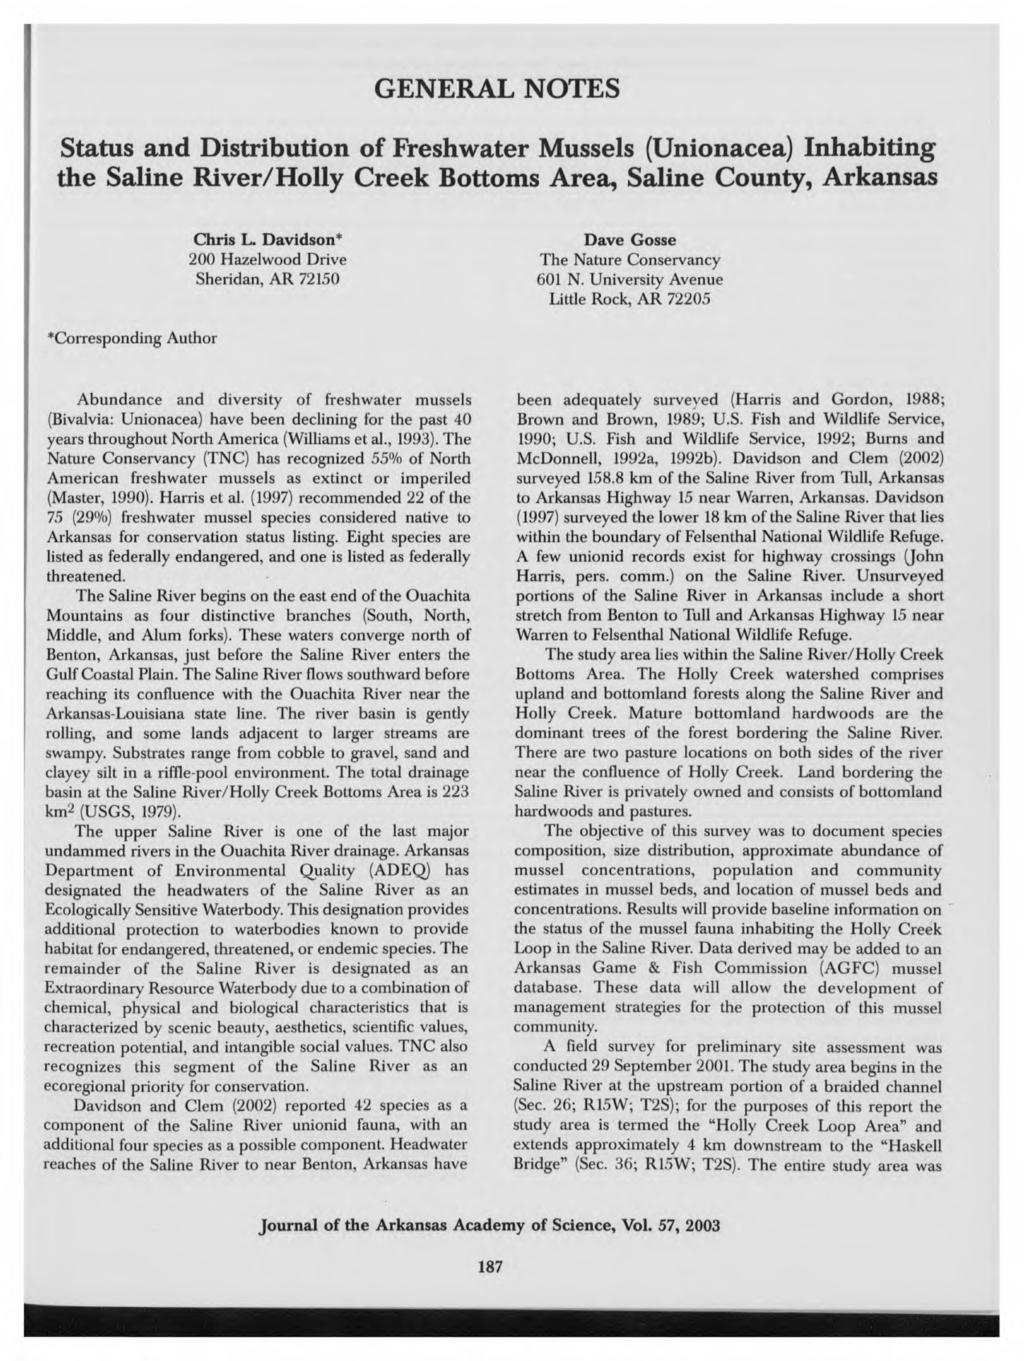 187 I GENERAL NOTES Status and Distribution of Freshwater Mussels (Unionacea) Inhabiting the Saline River/Holly Creek Bottoms Area, Saline County, Arkansas Chris L.